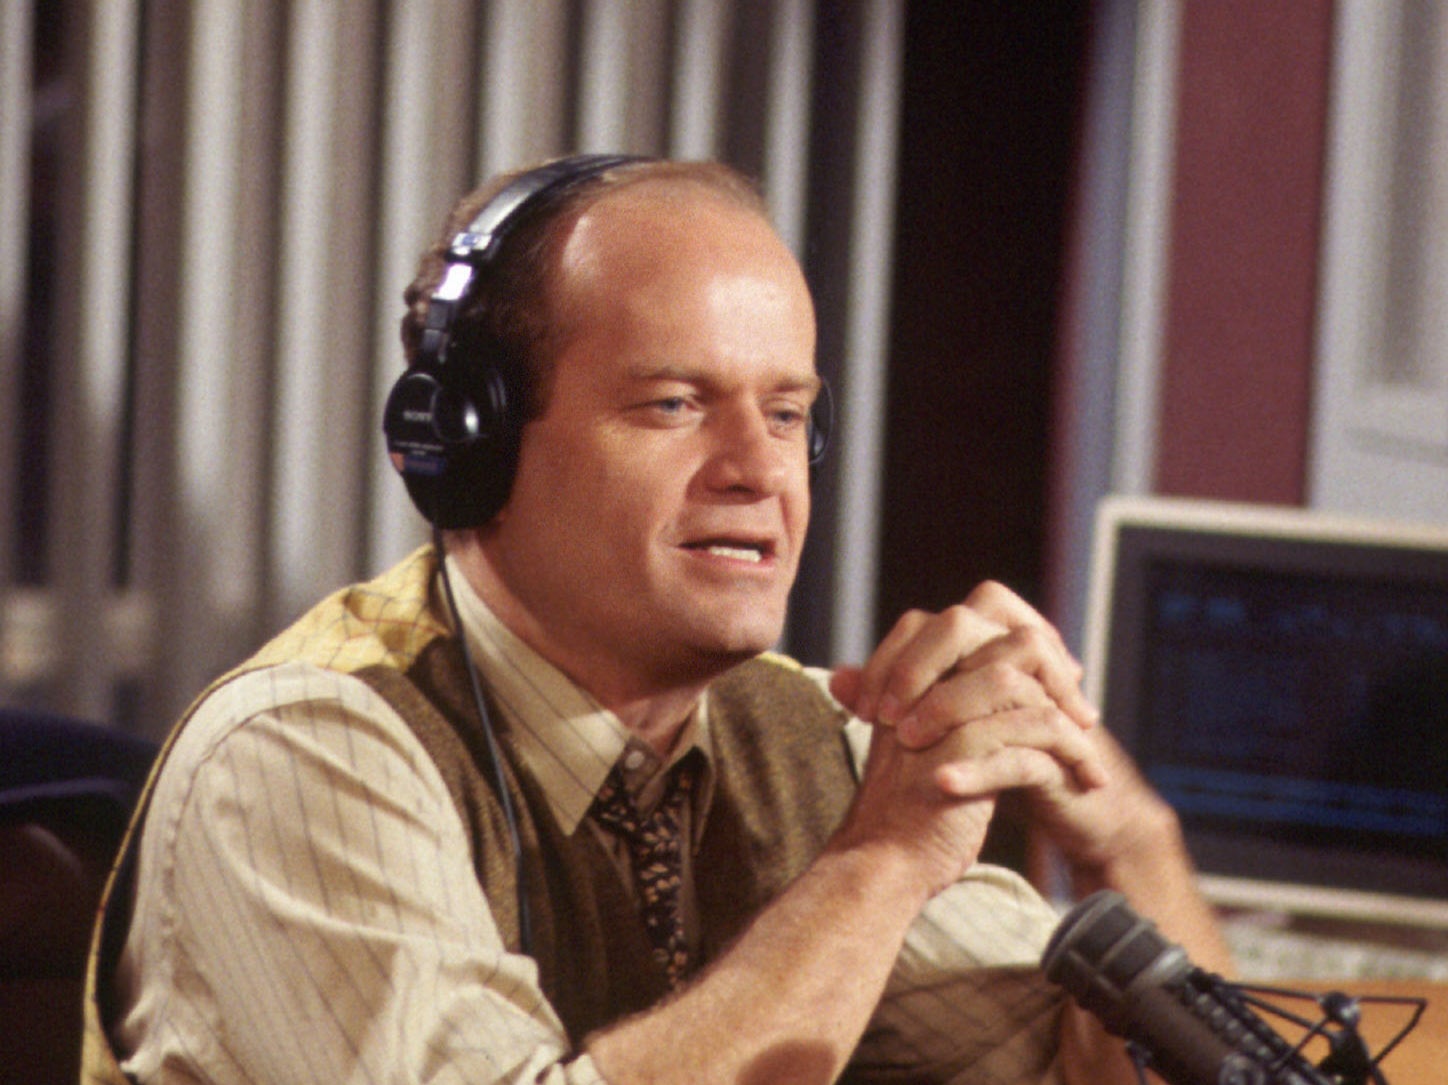 Grammer played fusty psychiatrist Frasier Crane for two decades, in Cheers and its spin-off, Frasier